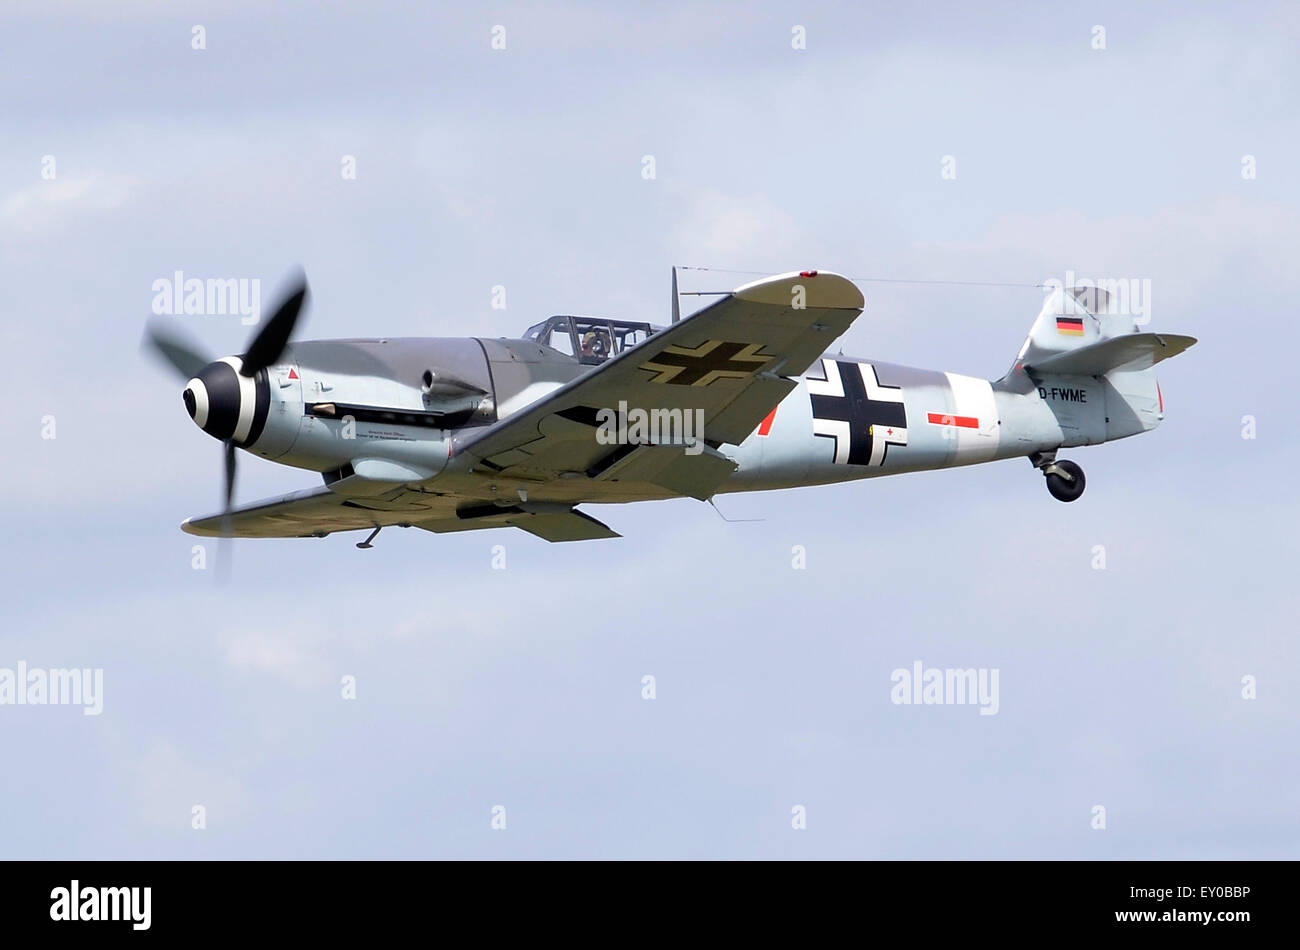 Messerschmitt Bf-109G-4 in Luftwaffe markings displaying during RIAT 2015's Battle of Britain 75th Anniversary flypasts.  Credit:  Antony Nettle/Alamy Live News Stock Photo